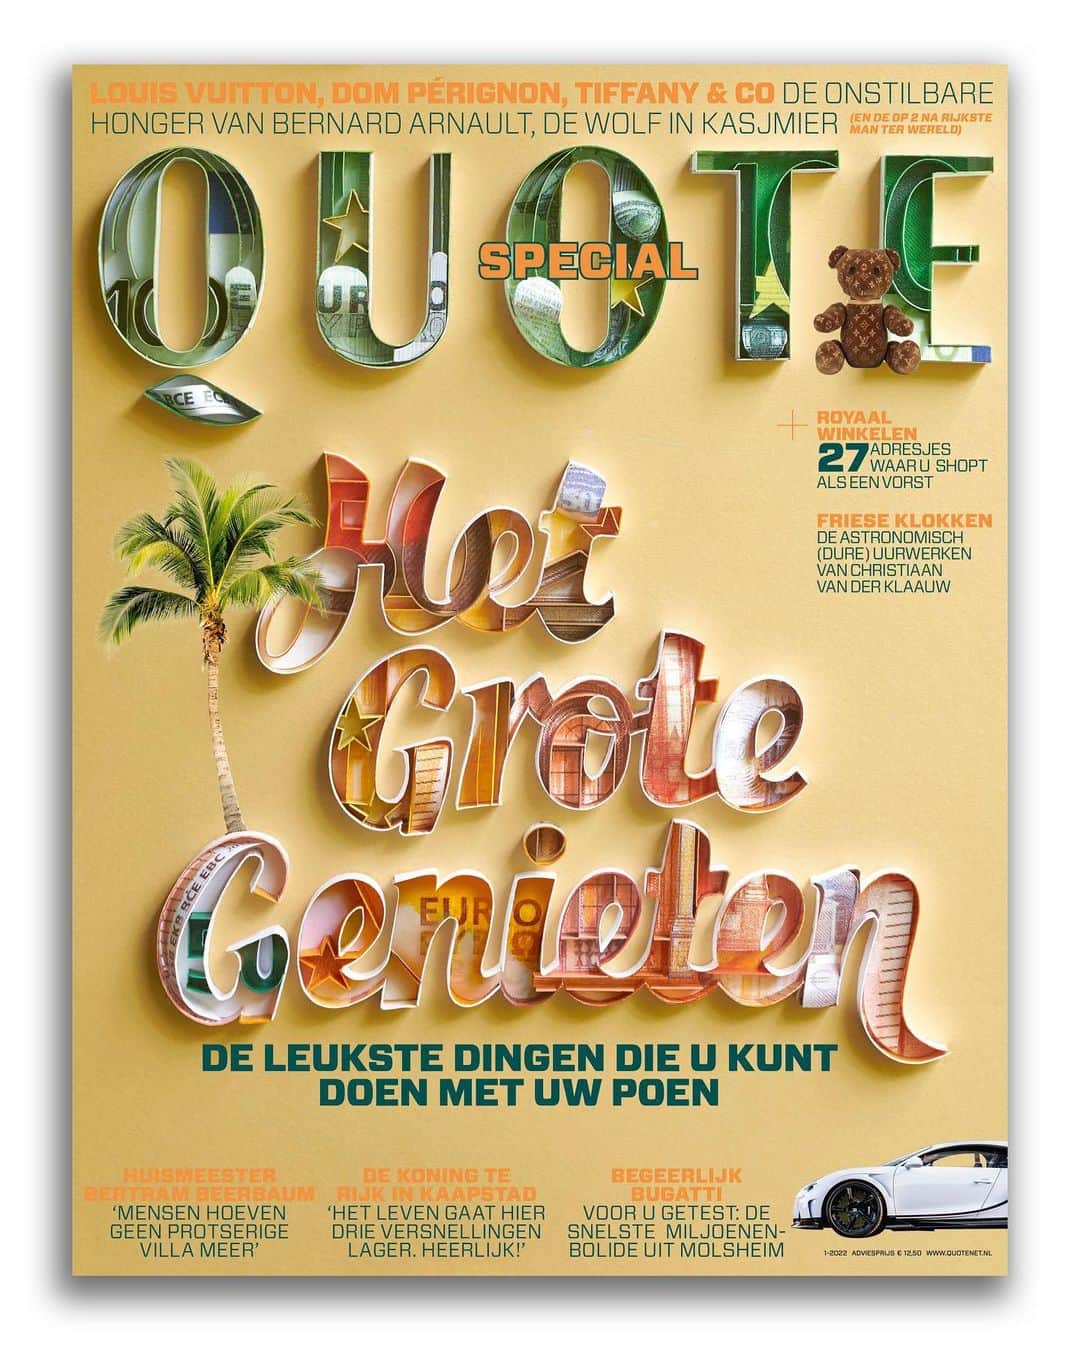 Sabeena Karnikのインスタグラム：「My cover art created for @hearstnetherlands Quote magazine using Euro bank notes €€€ !  The Dutch headline loosely translates to ‘live life to the fullest’ 💵💰 Swipe for some details and the magazine arrival today !」